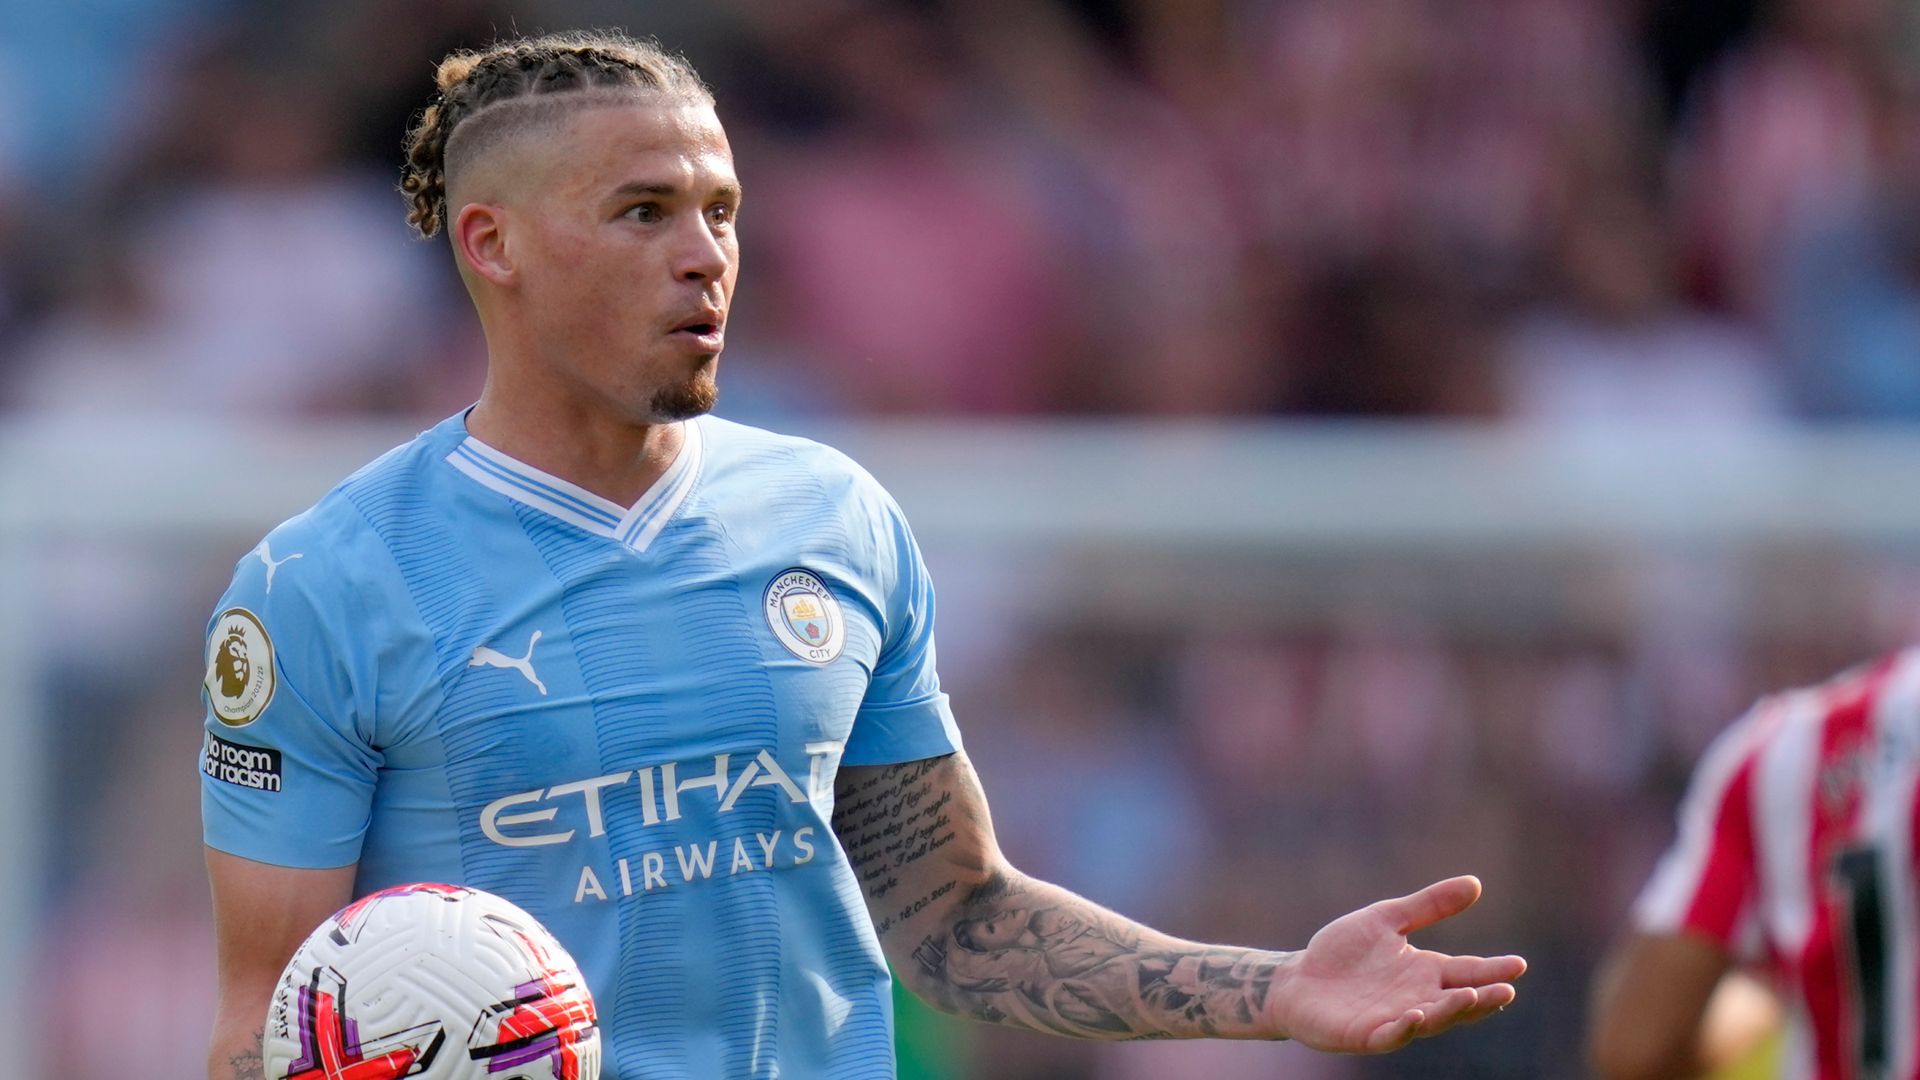 West Ham in talks over loan move for Man City's Phillips